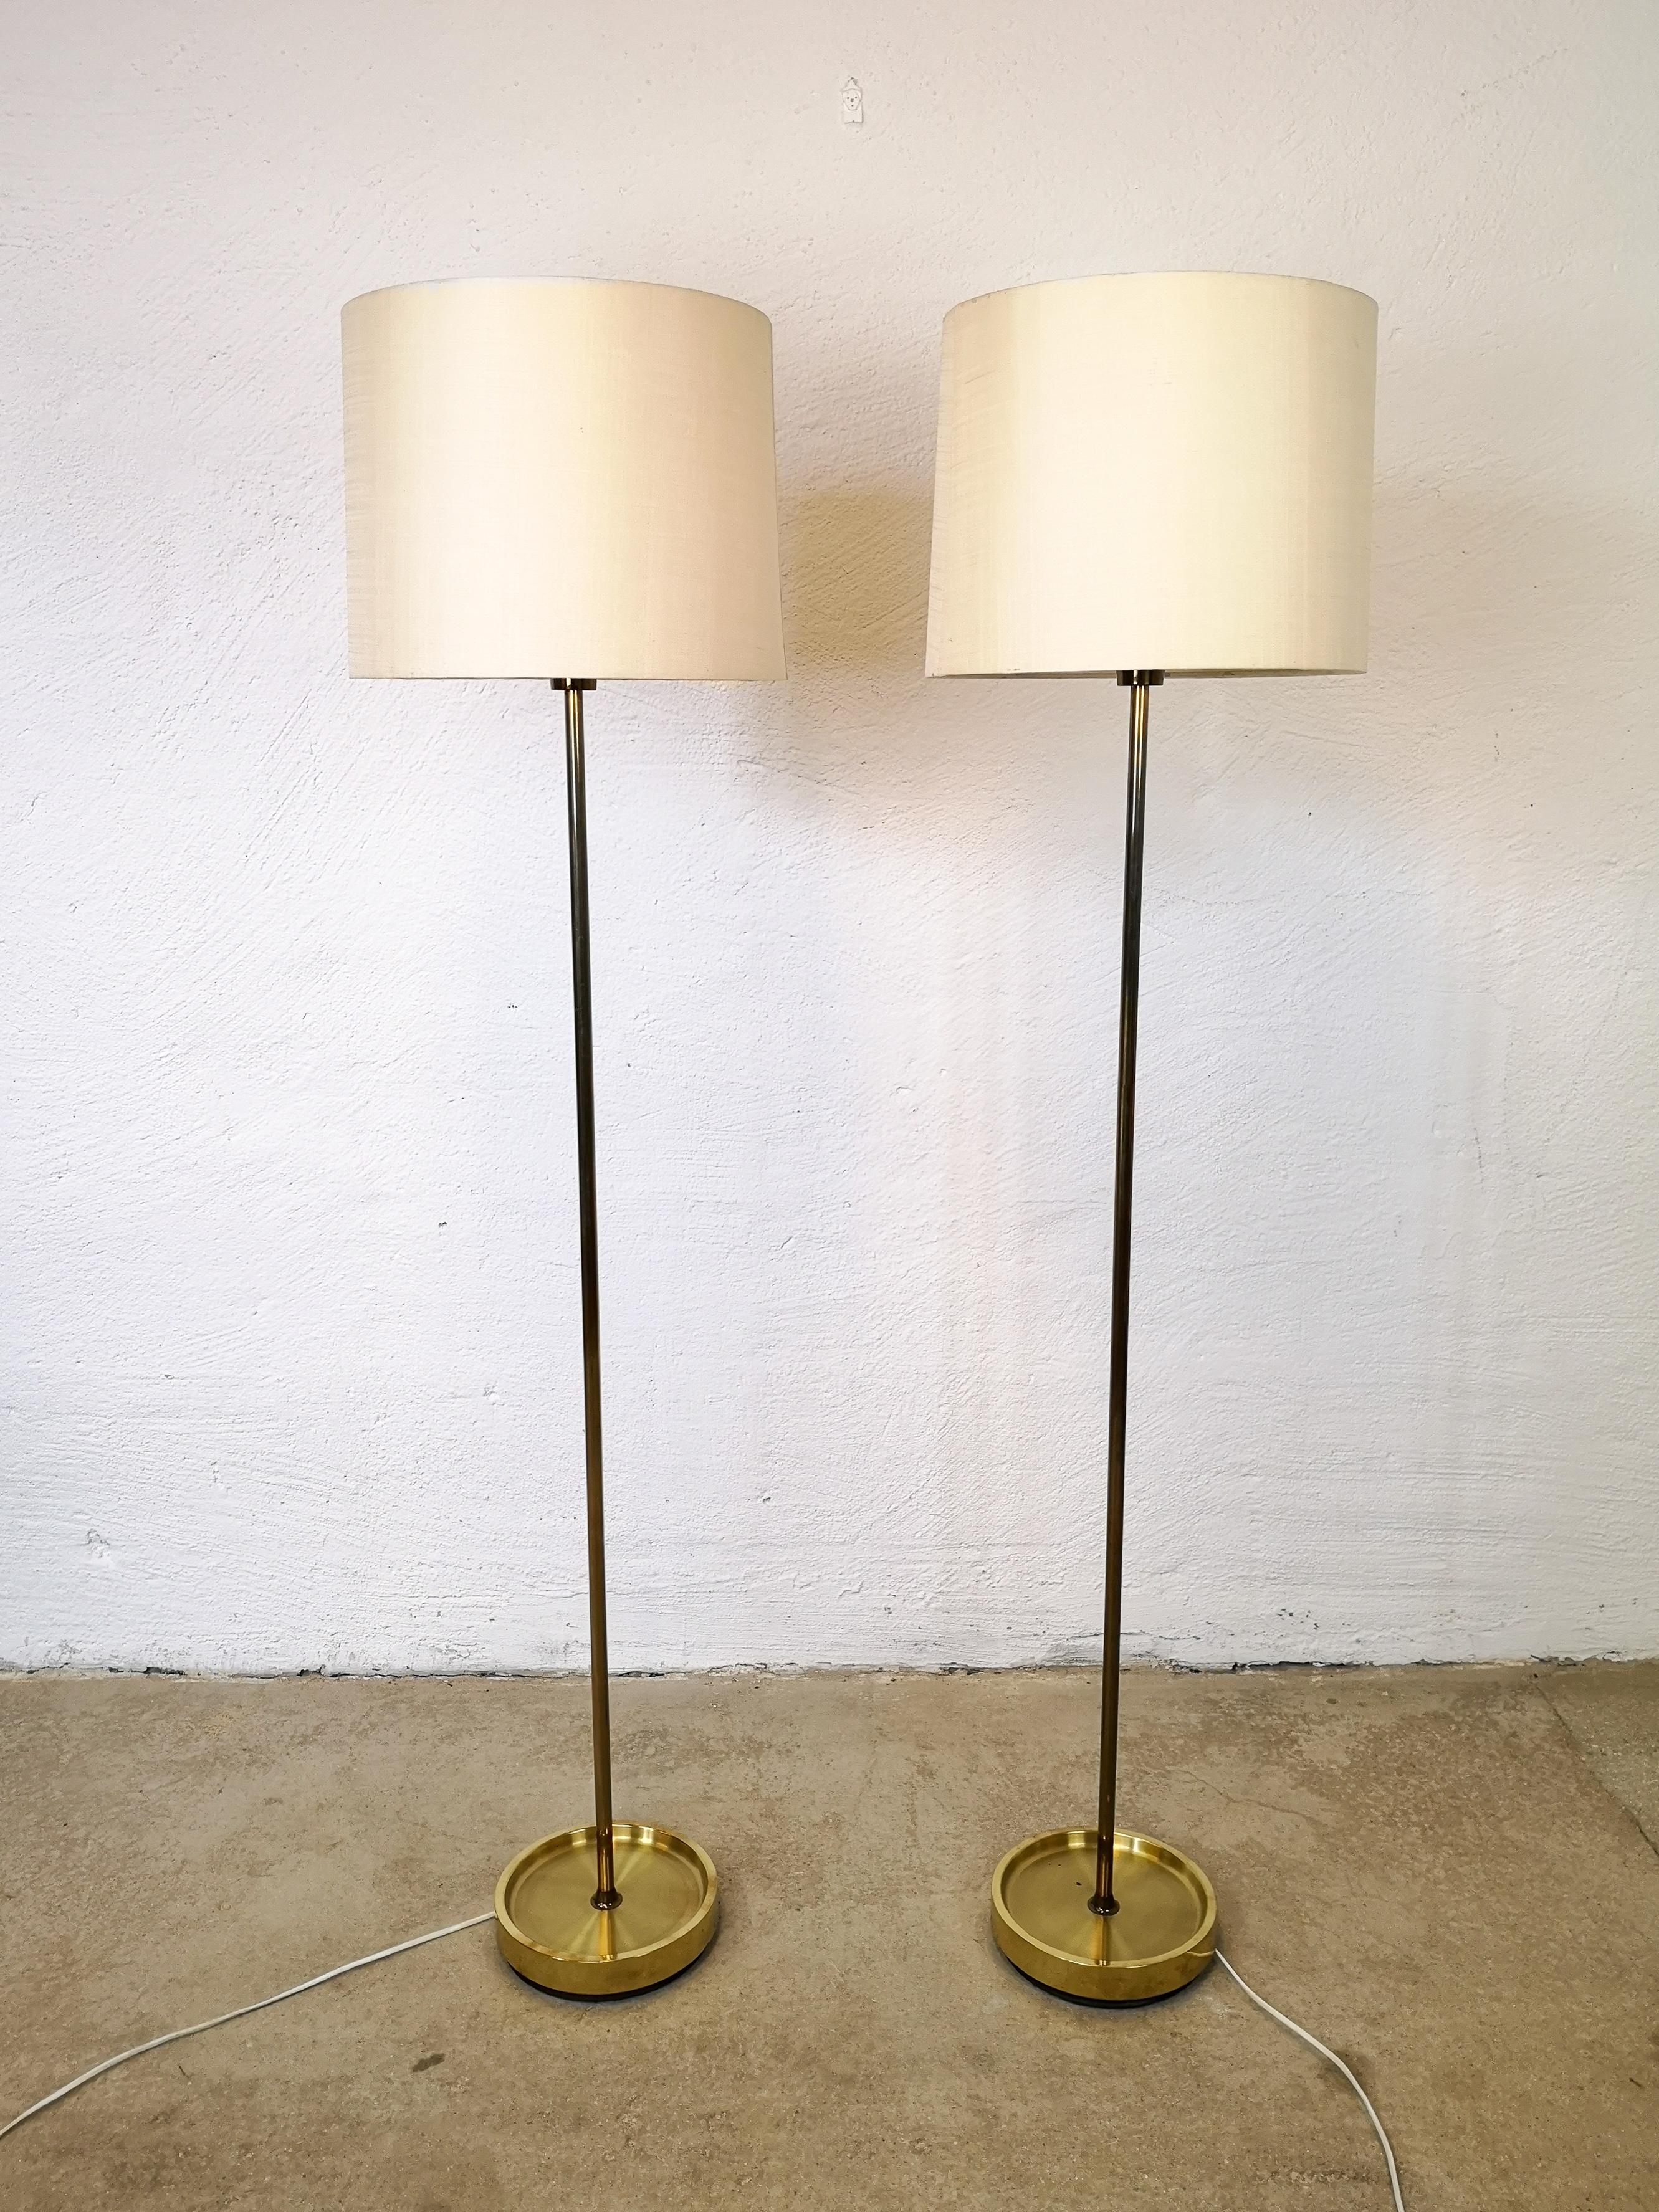 These brass floor lamps were manufactured in Sweden at Fagerhultsbelysning. It’s made in brass and have the original shades in fabric with acrylic top which gives a perfect calm upplight. 

Good working condition, small wears on the foot and the